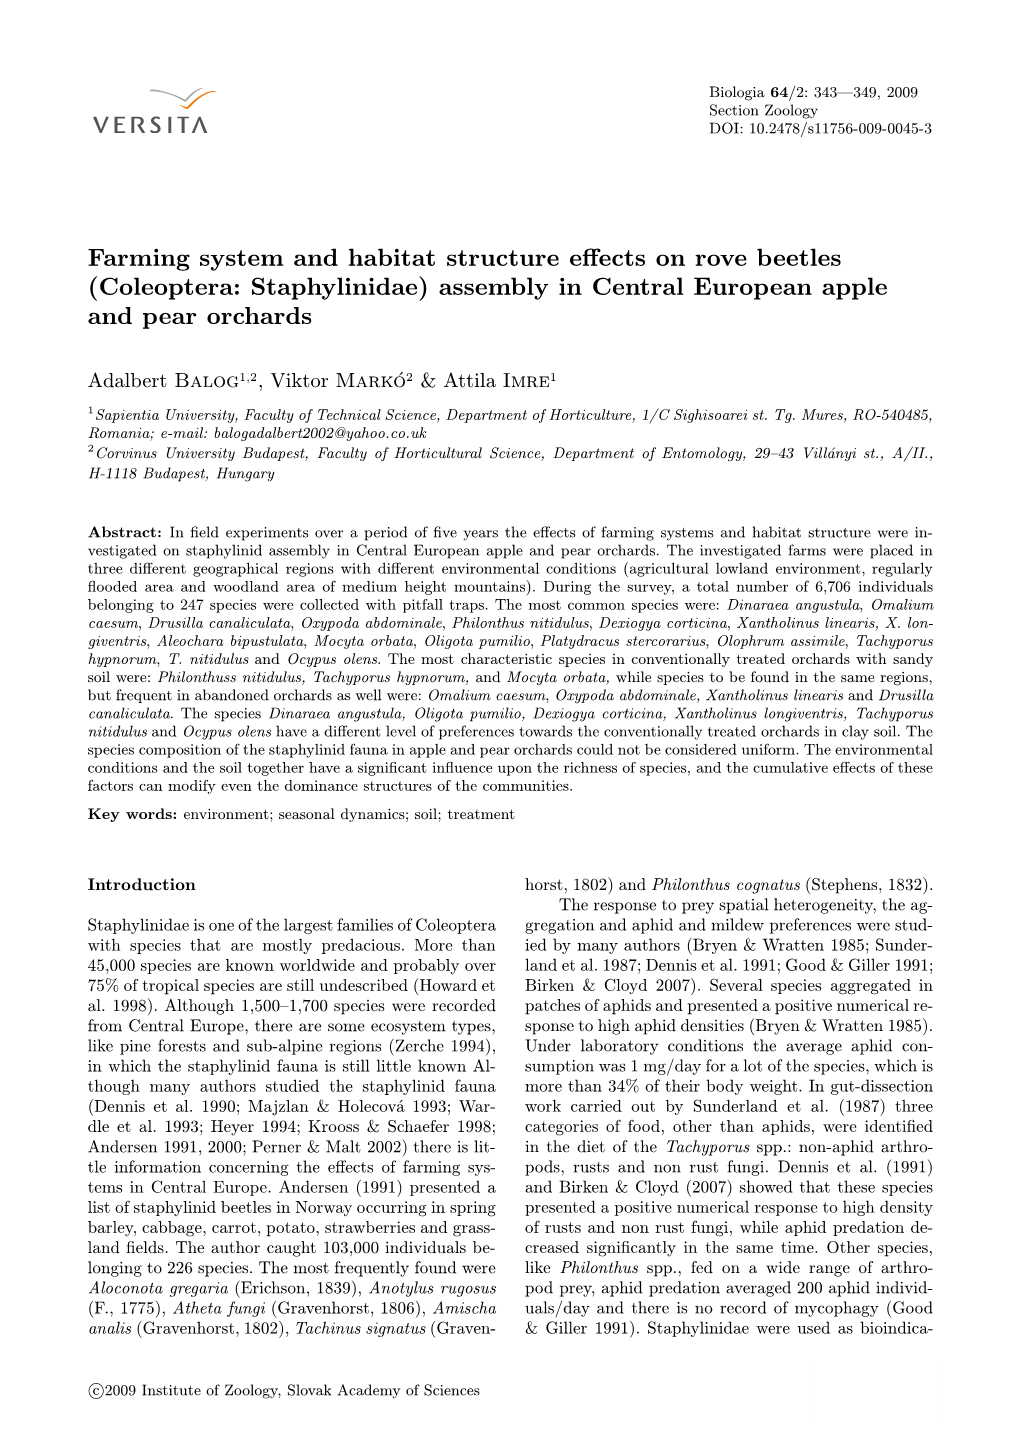 Farming System and Habitat Structure Effects on Rove Beetles (Coleoptera: Staphylinidae) Assembly in Central European Apple